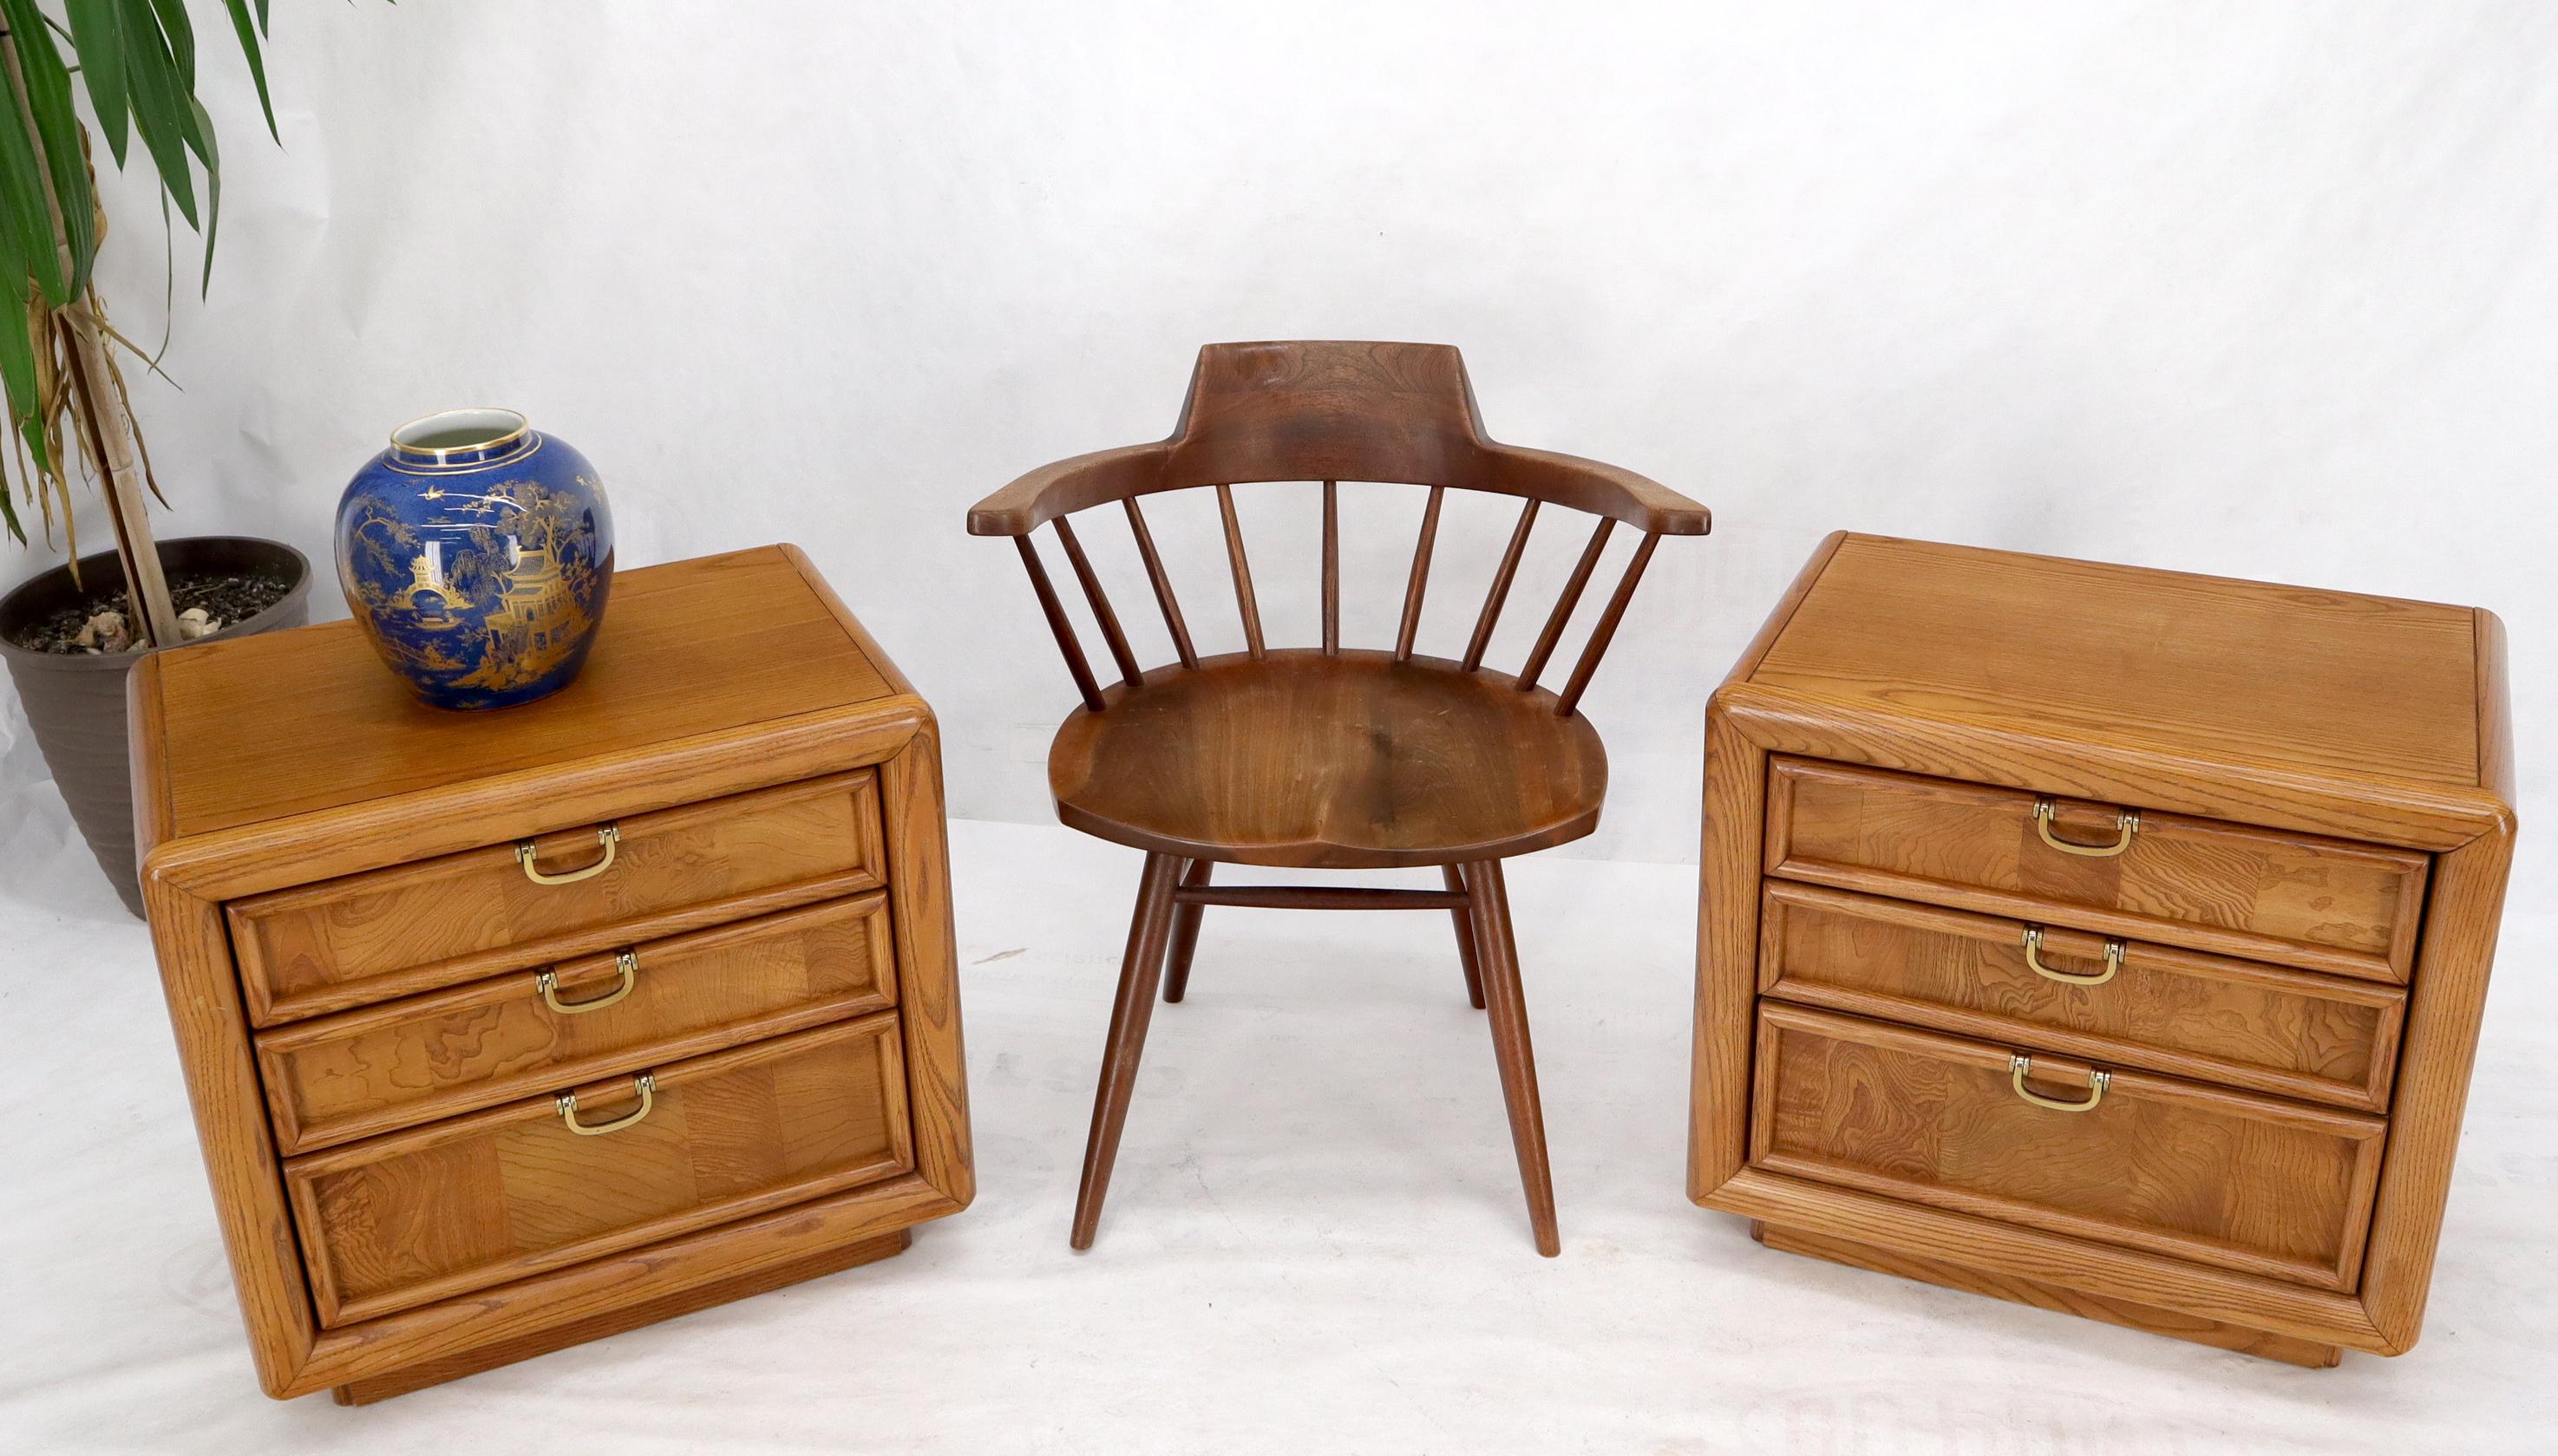 Pair of Mid-Century Modern 3 drawer oak and burl wood night stands by Broyhill.
 